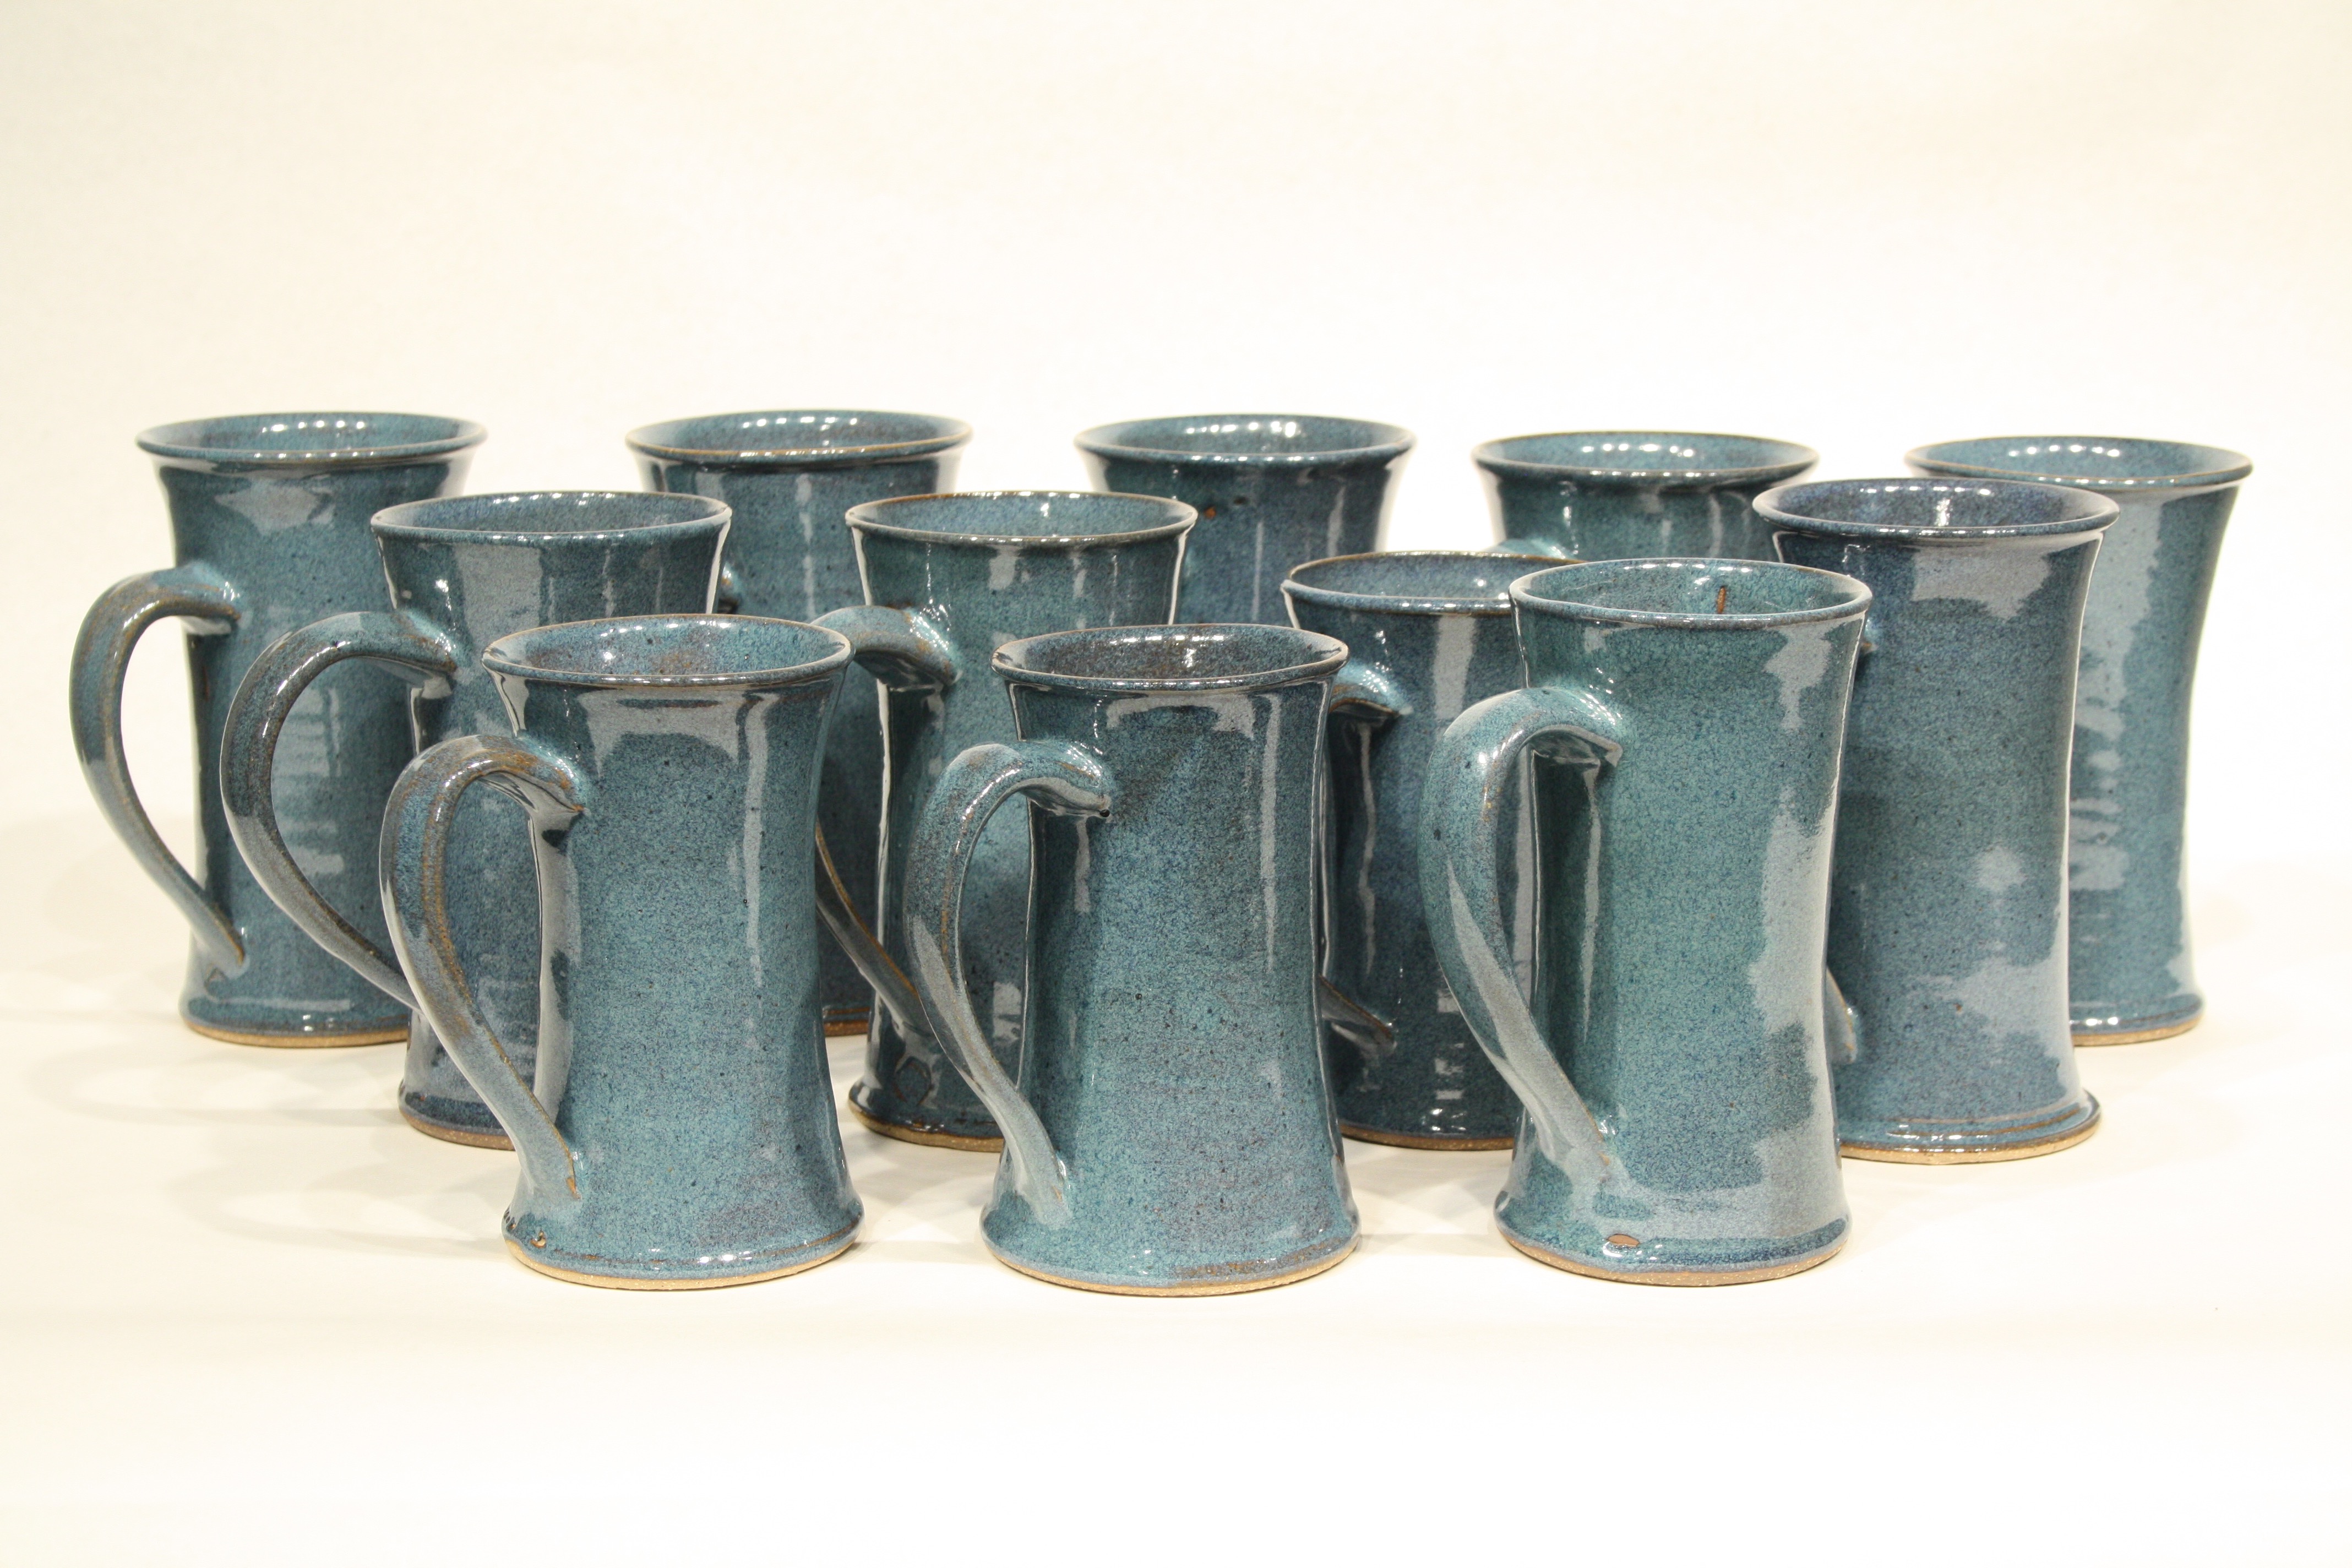 12 of a series of 150 turquoise glazed ceramic mugs